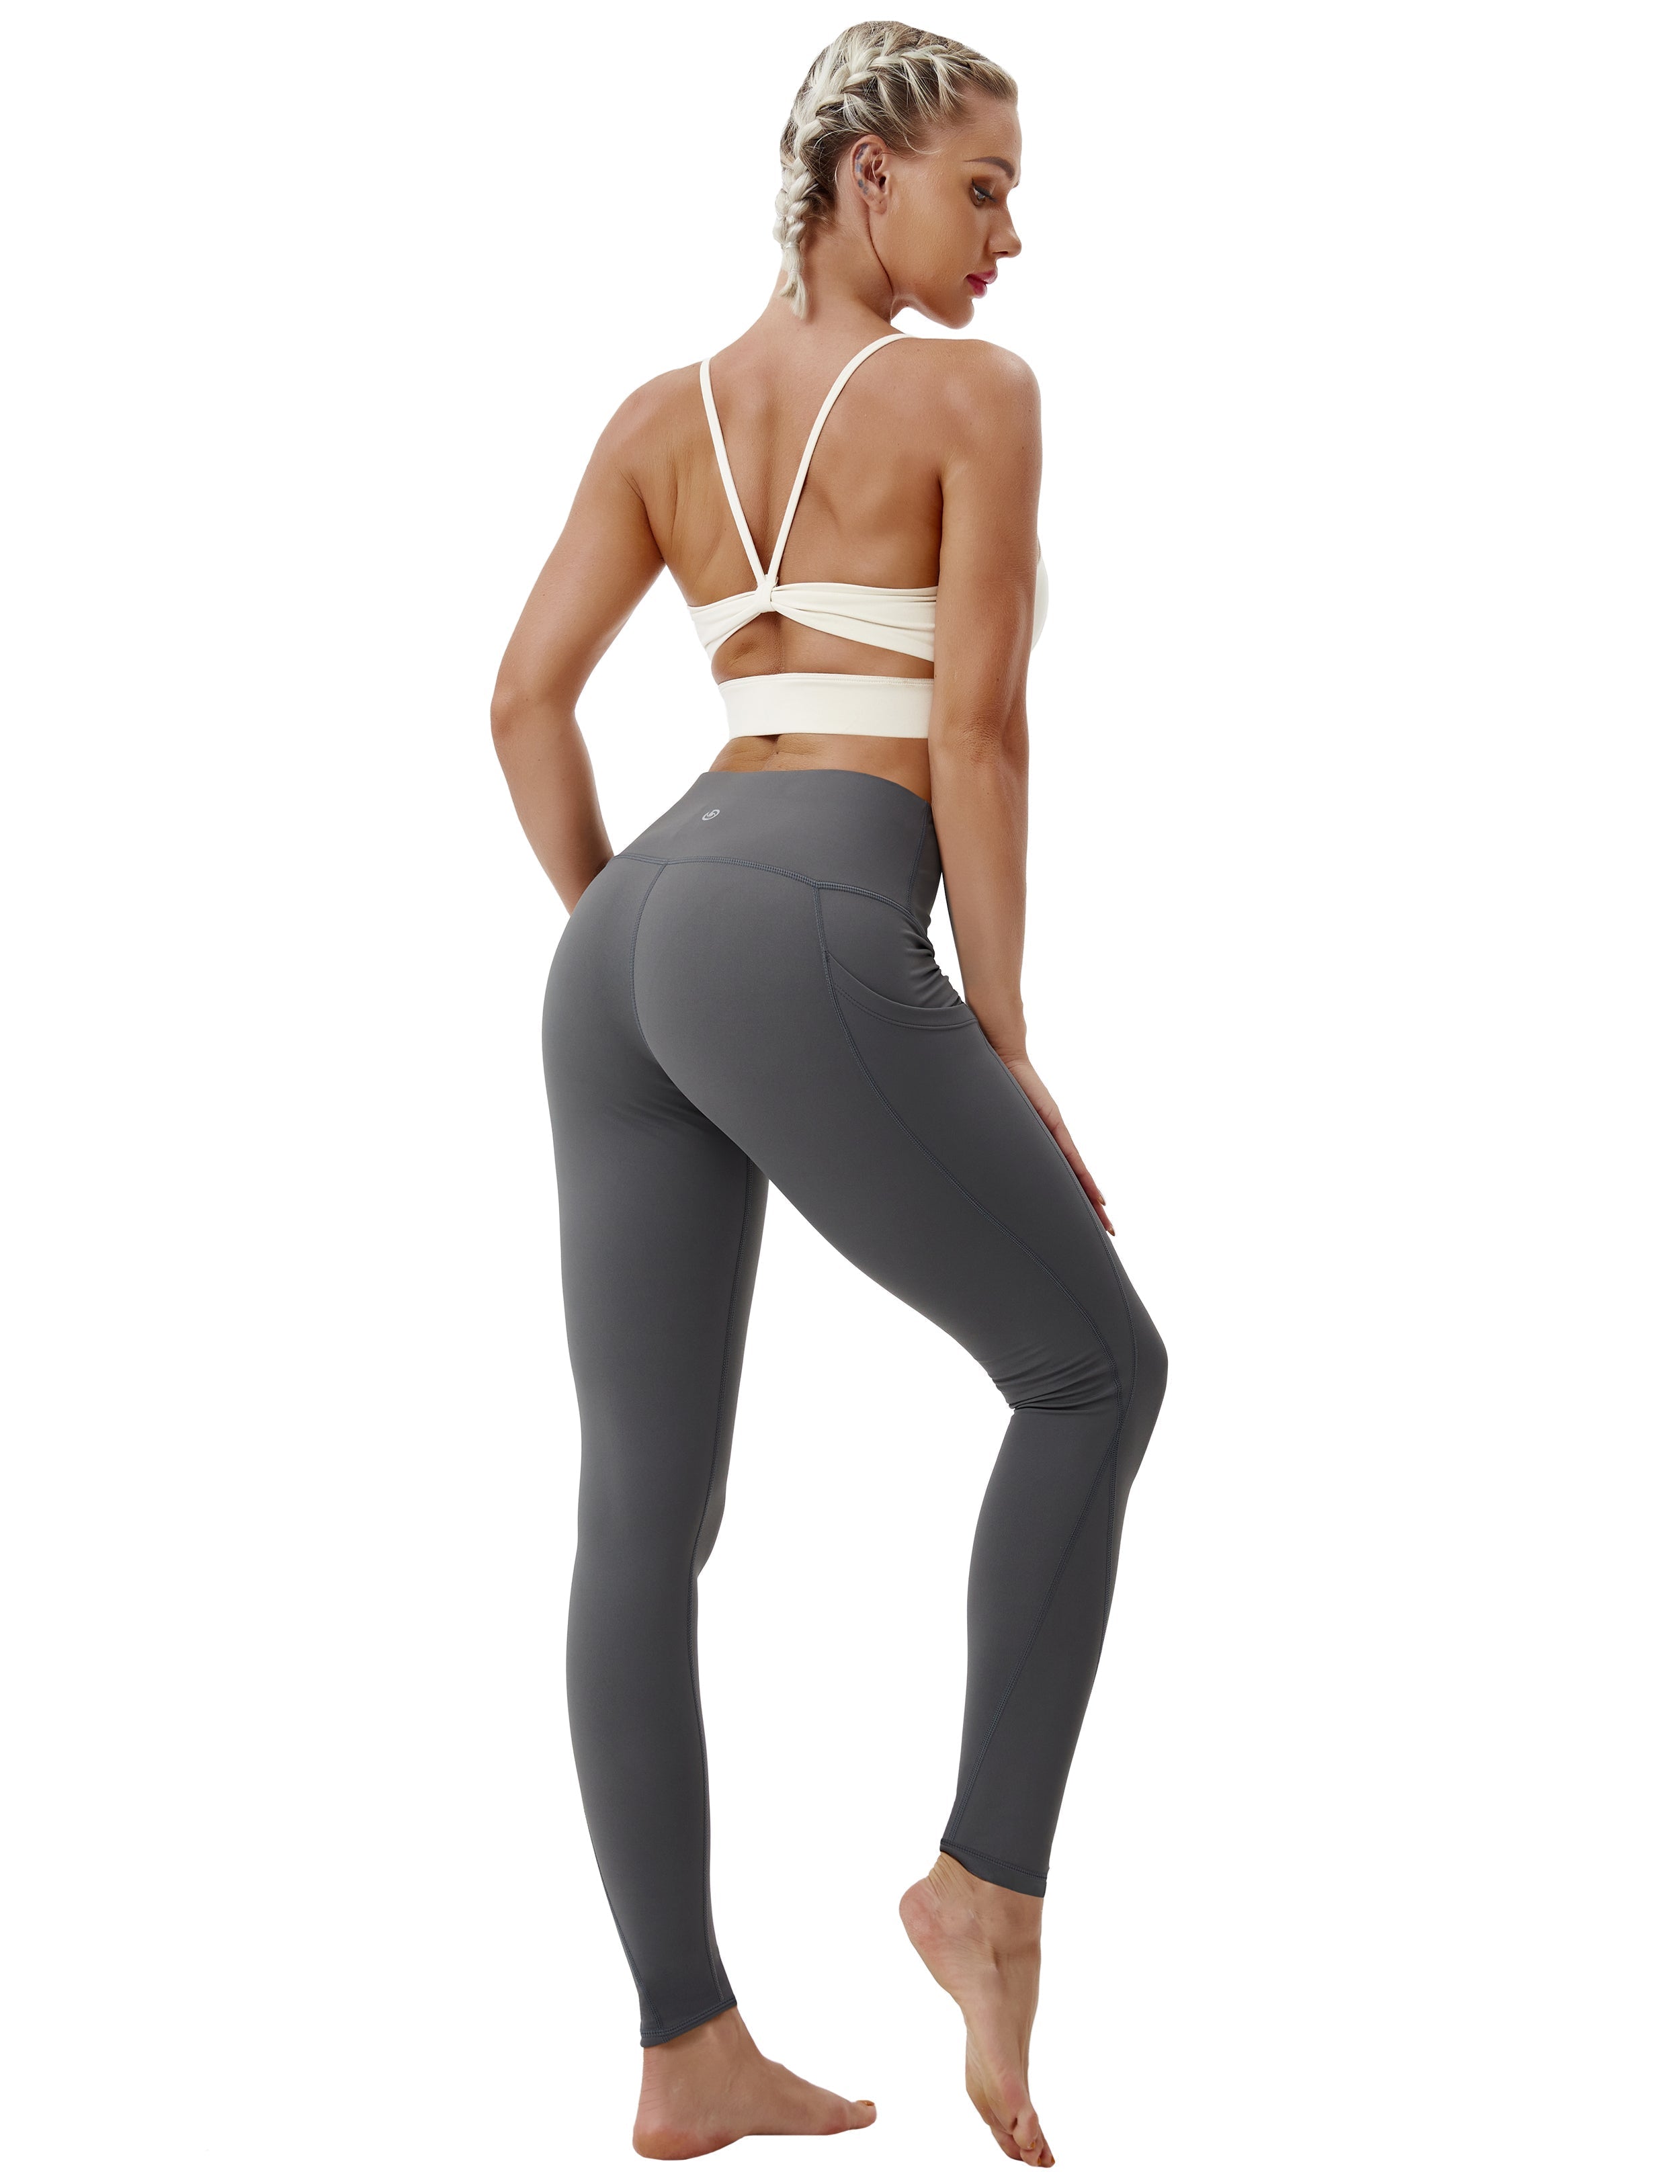 High Waist Side Pockets Running Pants shadowcharcoal 75% Nylon, 25% Spandex Fabric doesn't attract lint easily 4-way stretch No see-through Moisture-wicking Tummy control Inner pocket